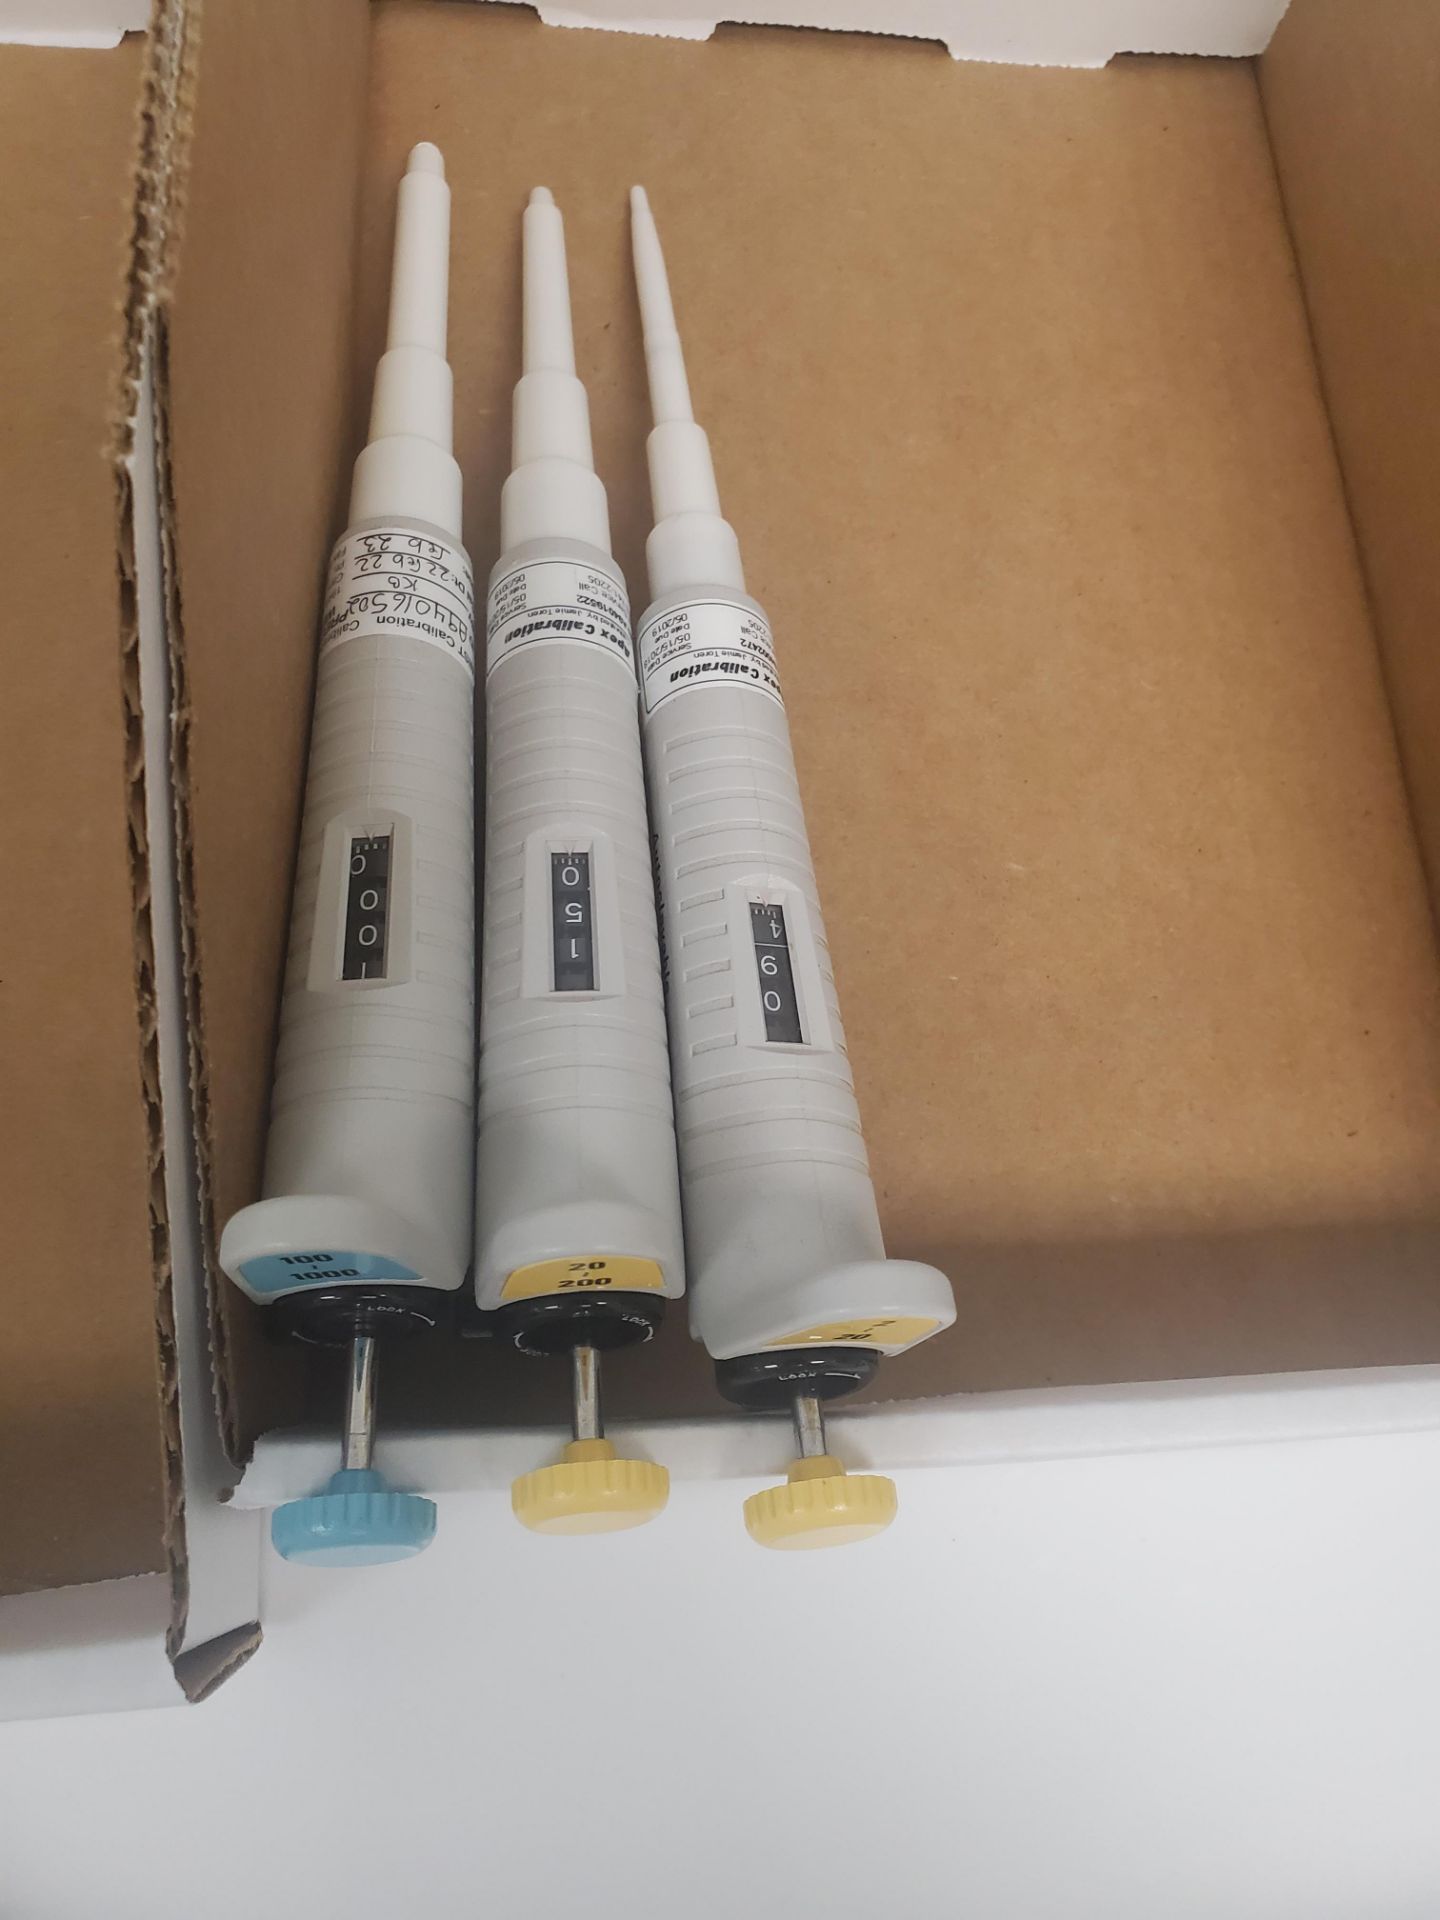 (3) Nichiryo Oxford Series Autoclavable Pipets